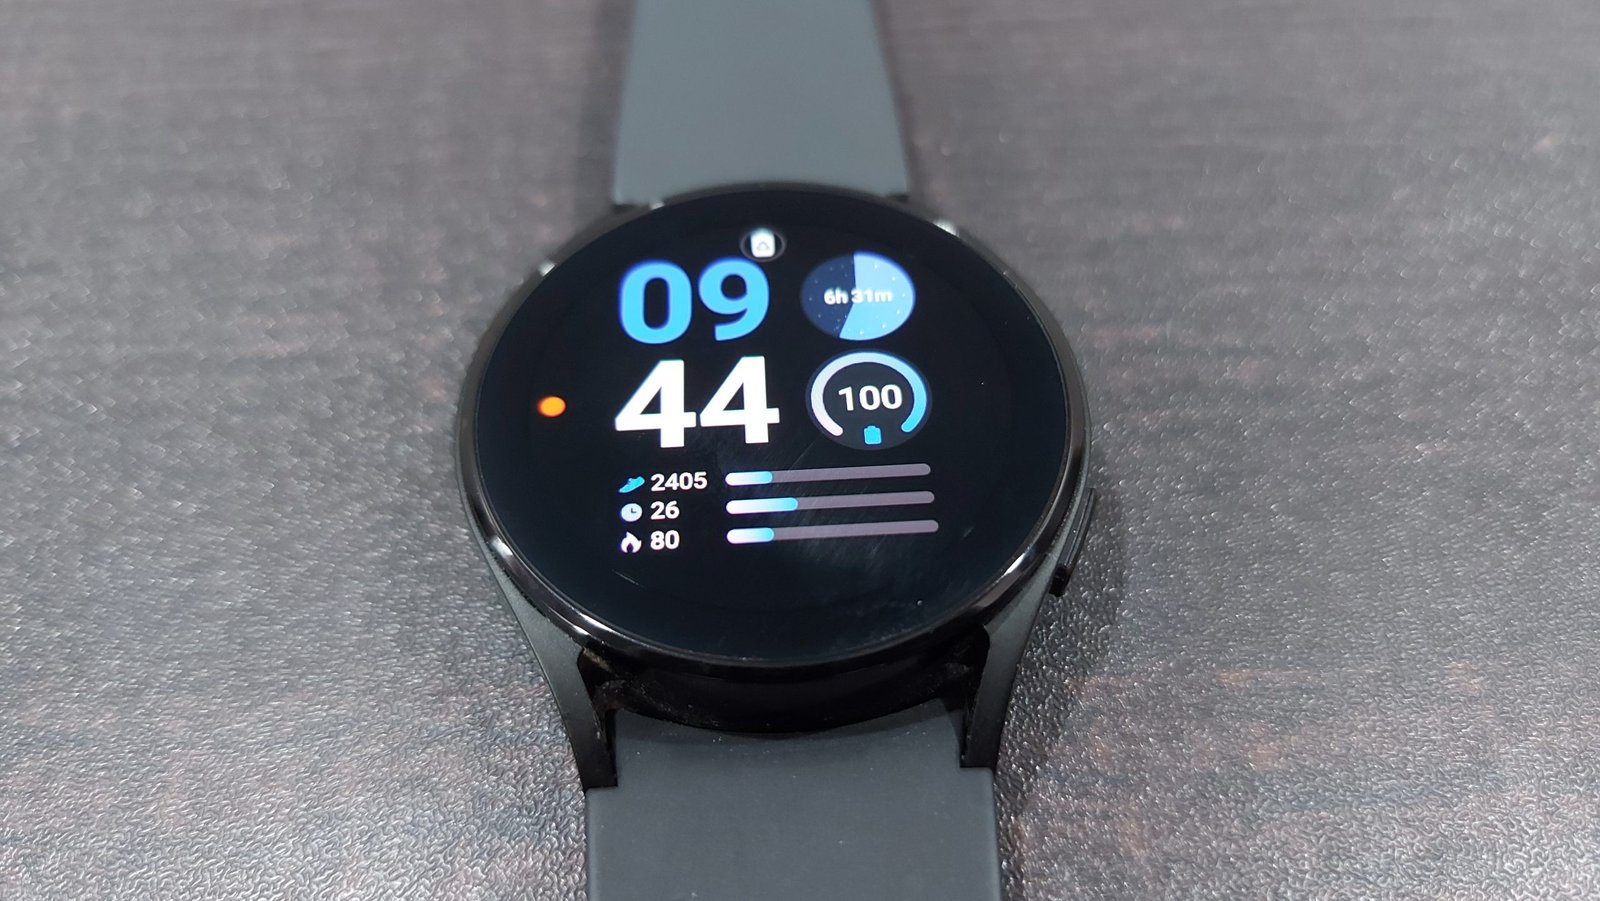 Sleep Tracking Review for Galaxy Watch 4 Series